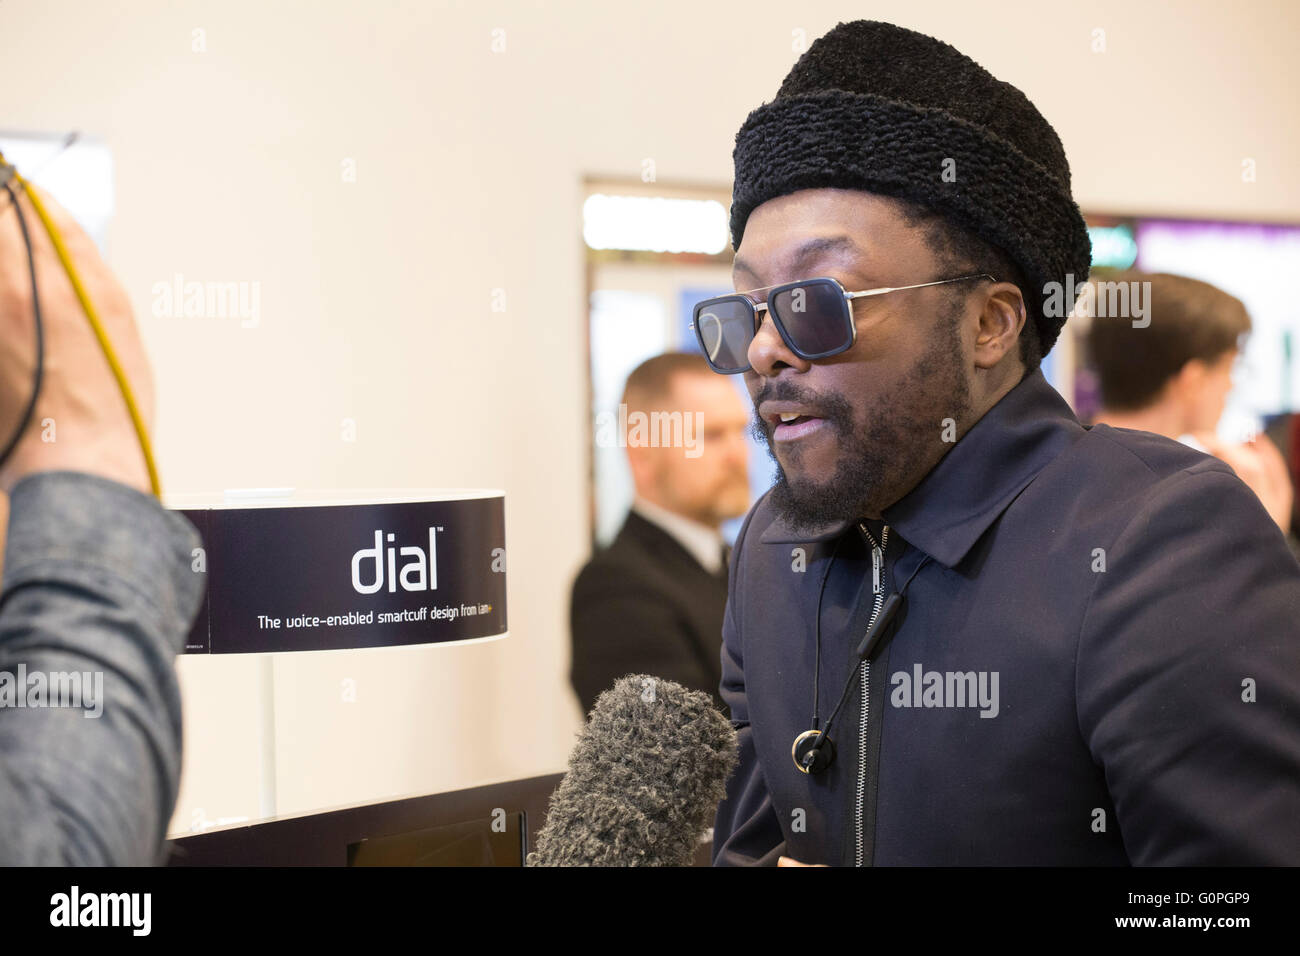 Will I Am at the launch of his new smart watch 'Dial' in Westfield shopping center, Stratford, London Stock Photo